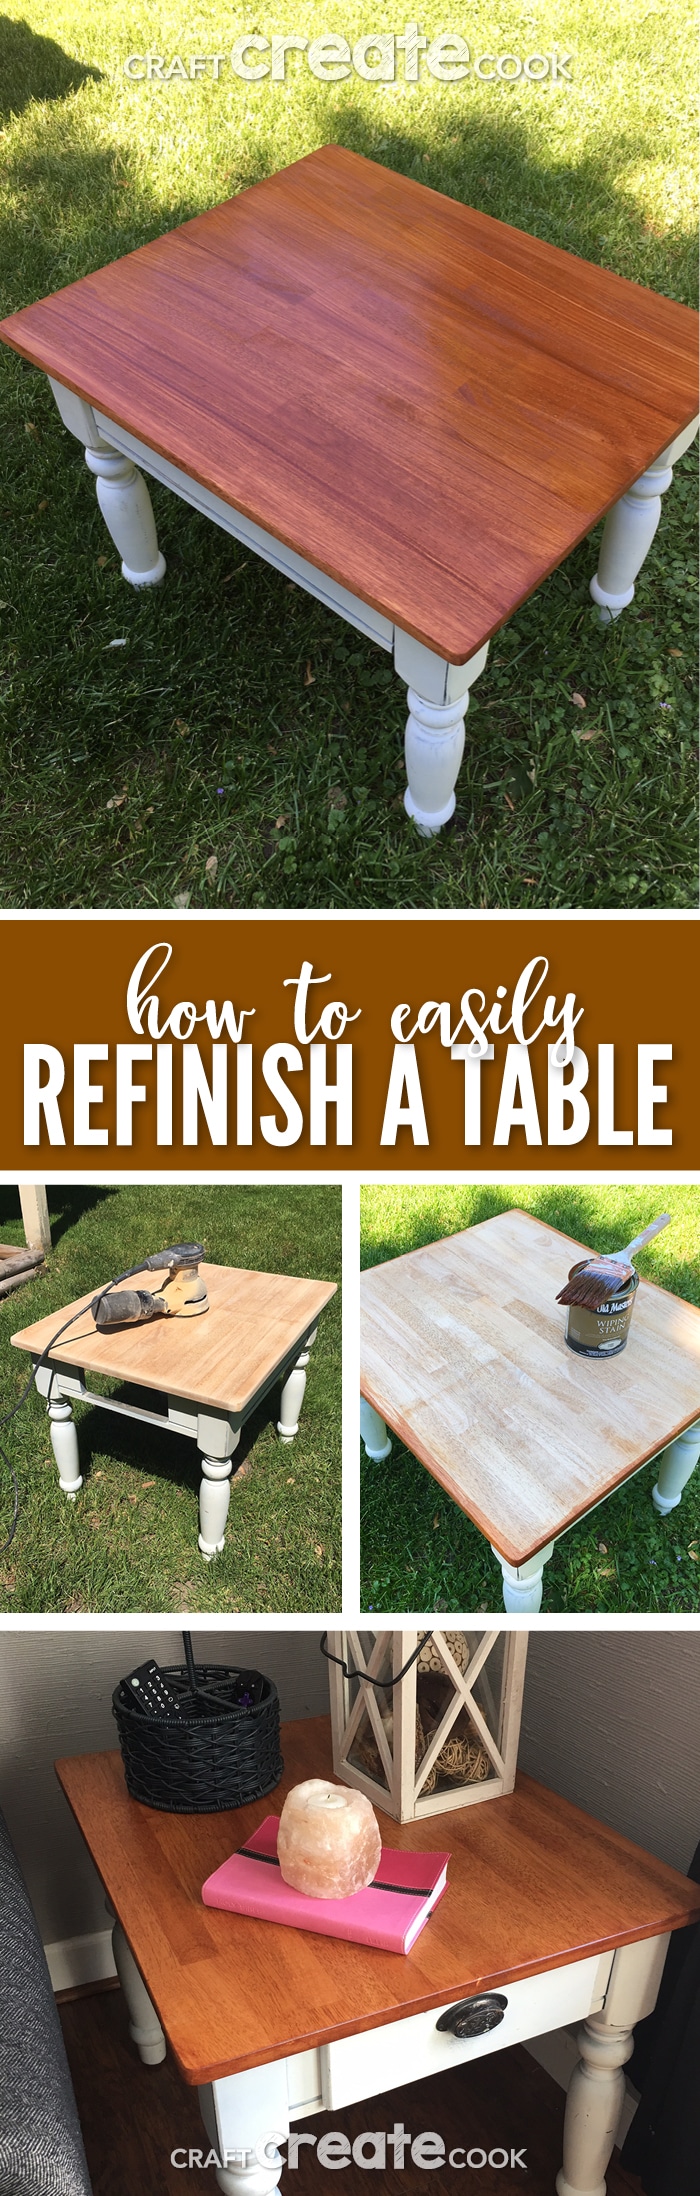 How to Easily Refinish a Table Yourself - Craft Create Cook